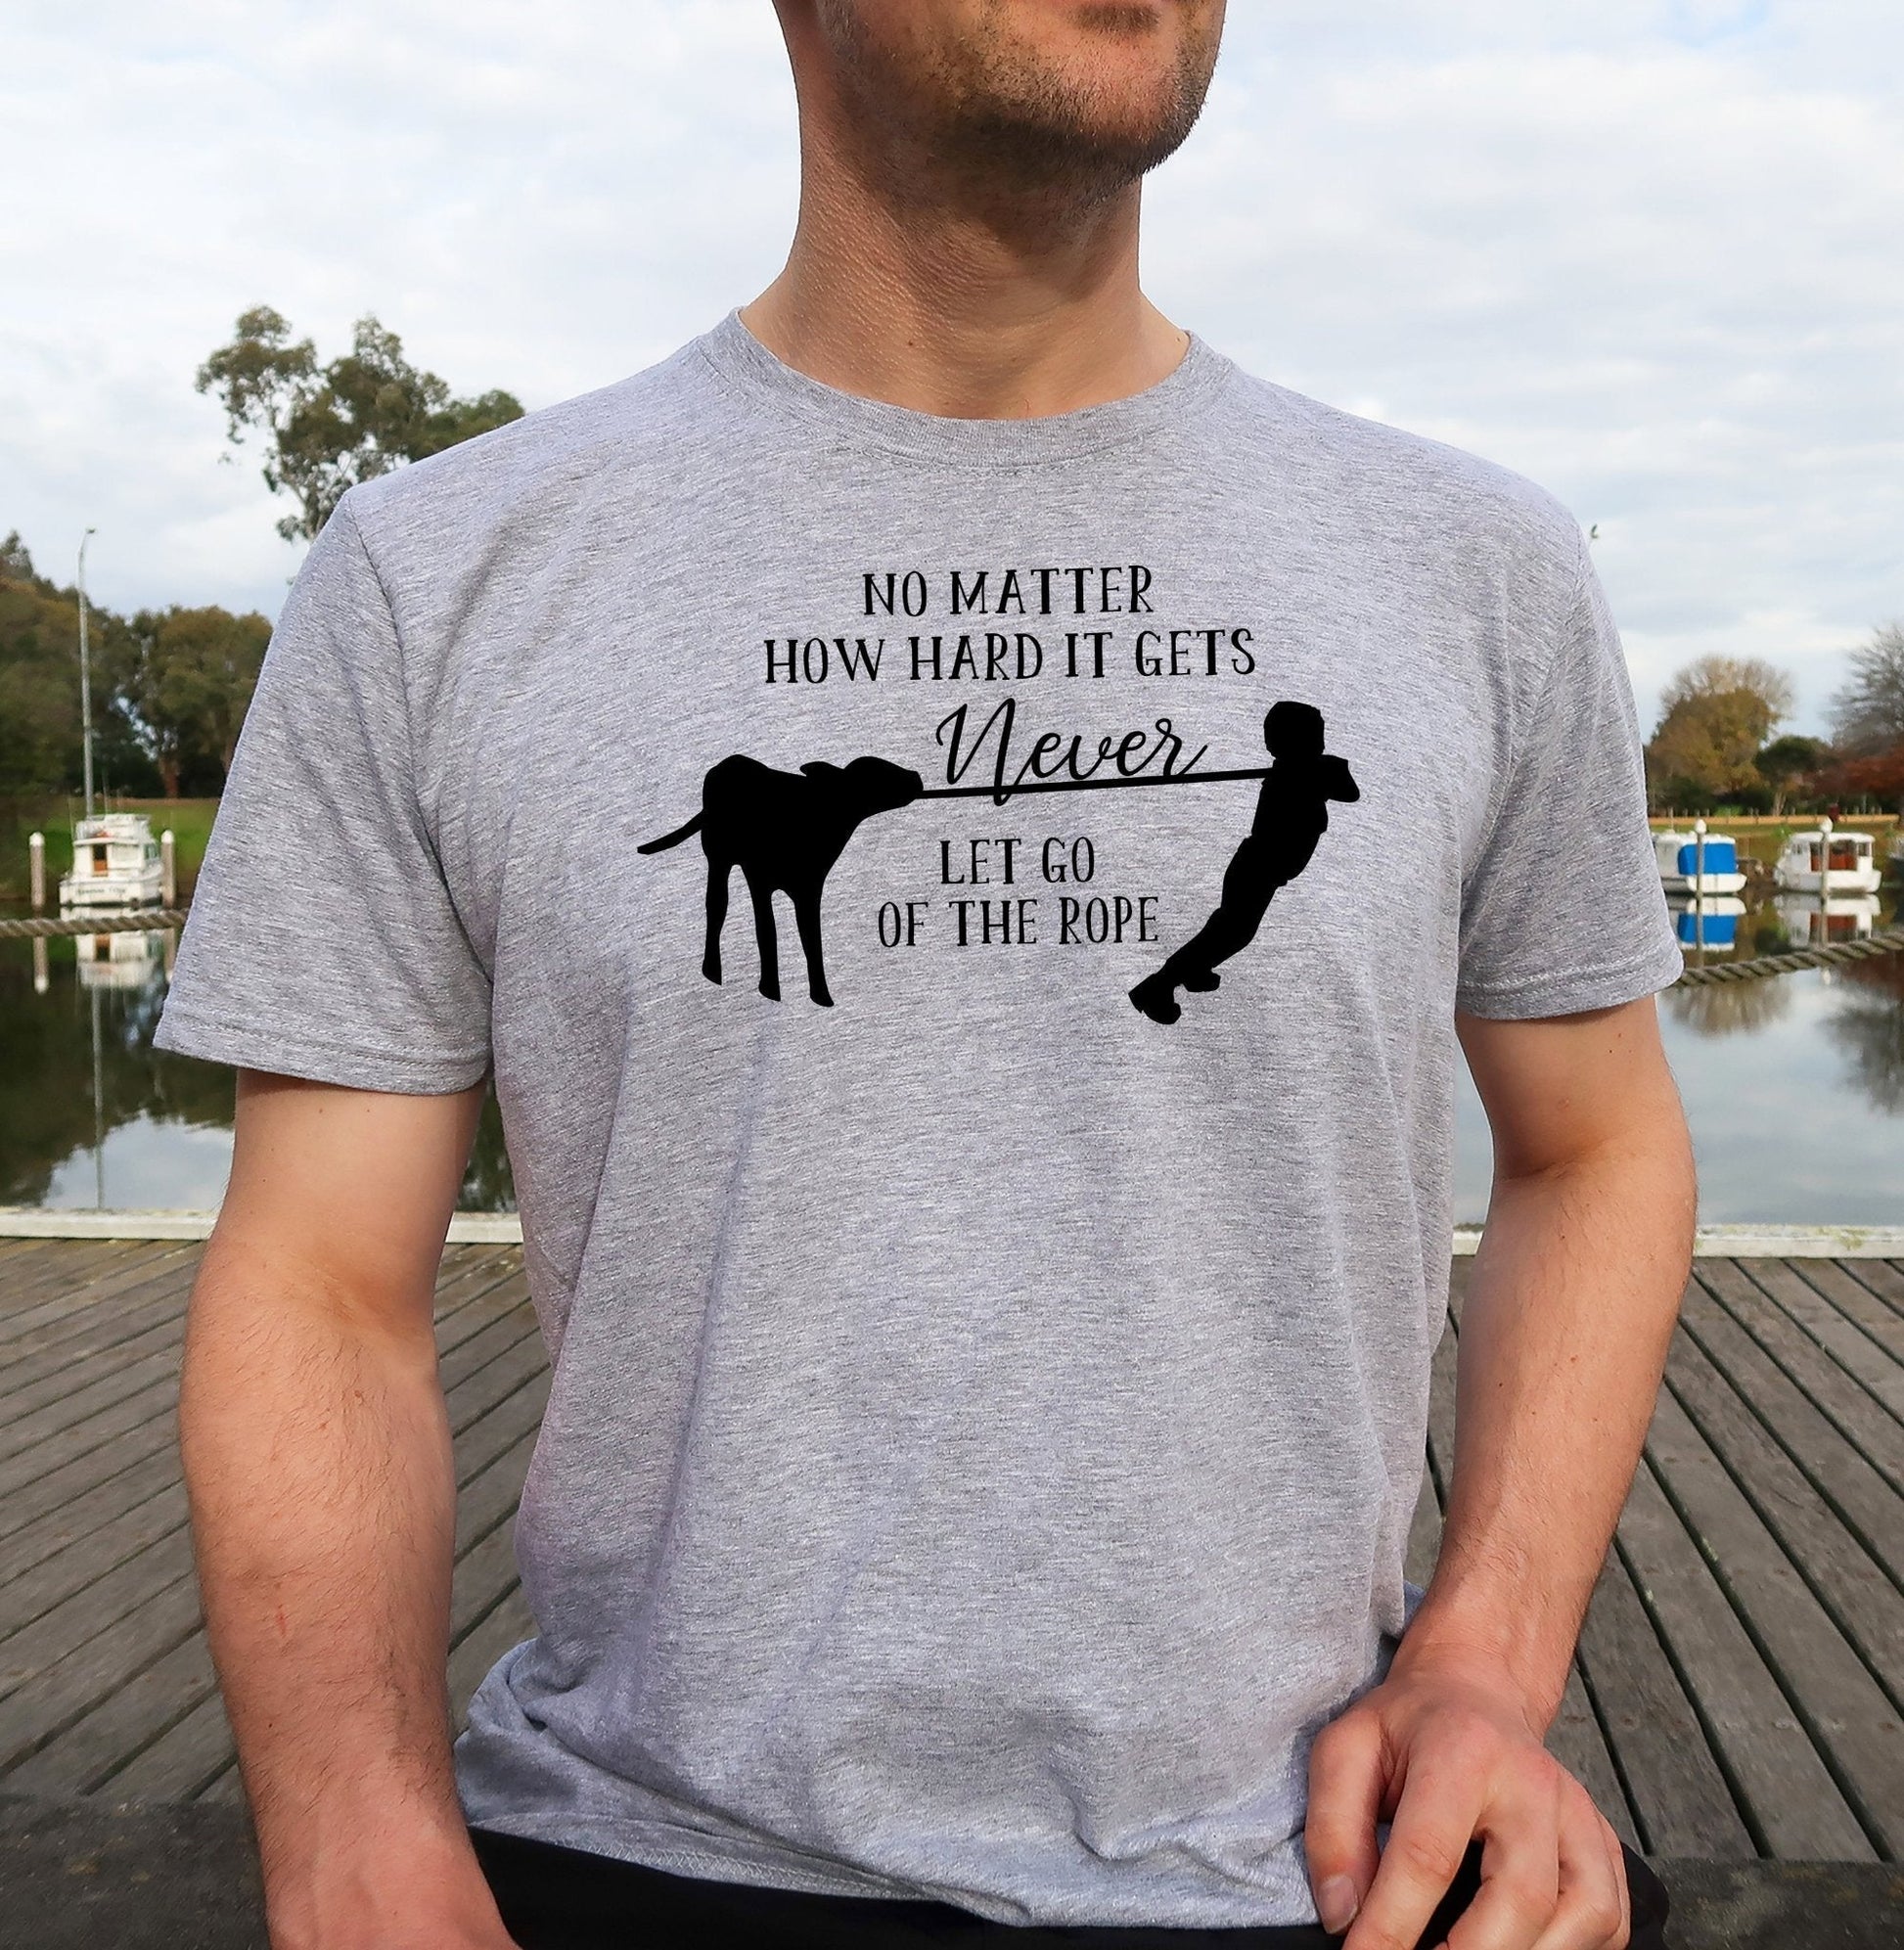 No Matter How Hard it Gets Never Let Go of the Rope (Male) Adult/Youth Cotton T-Shirt | Cryin Creek